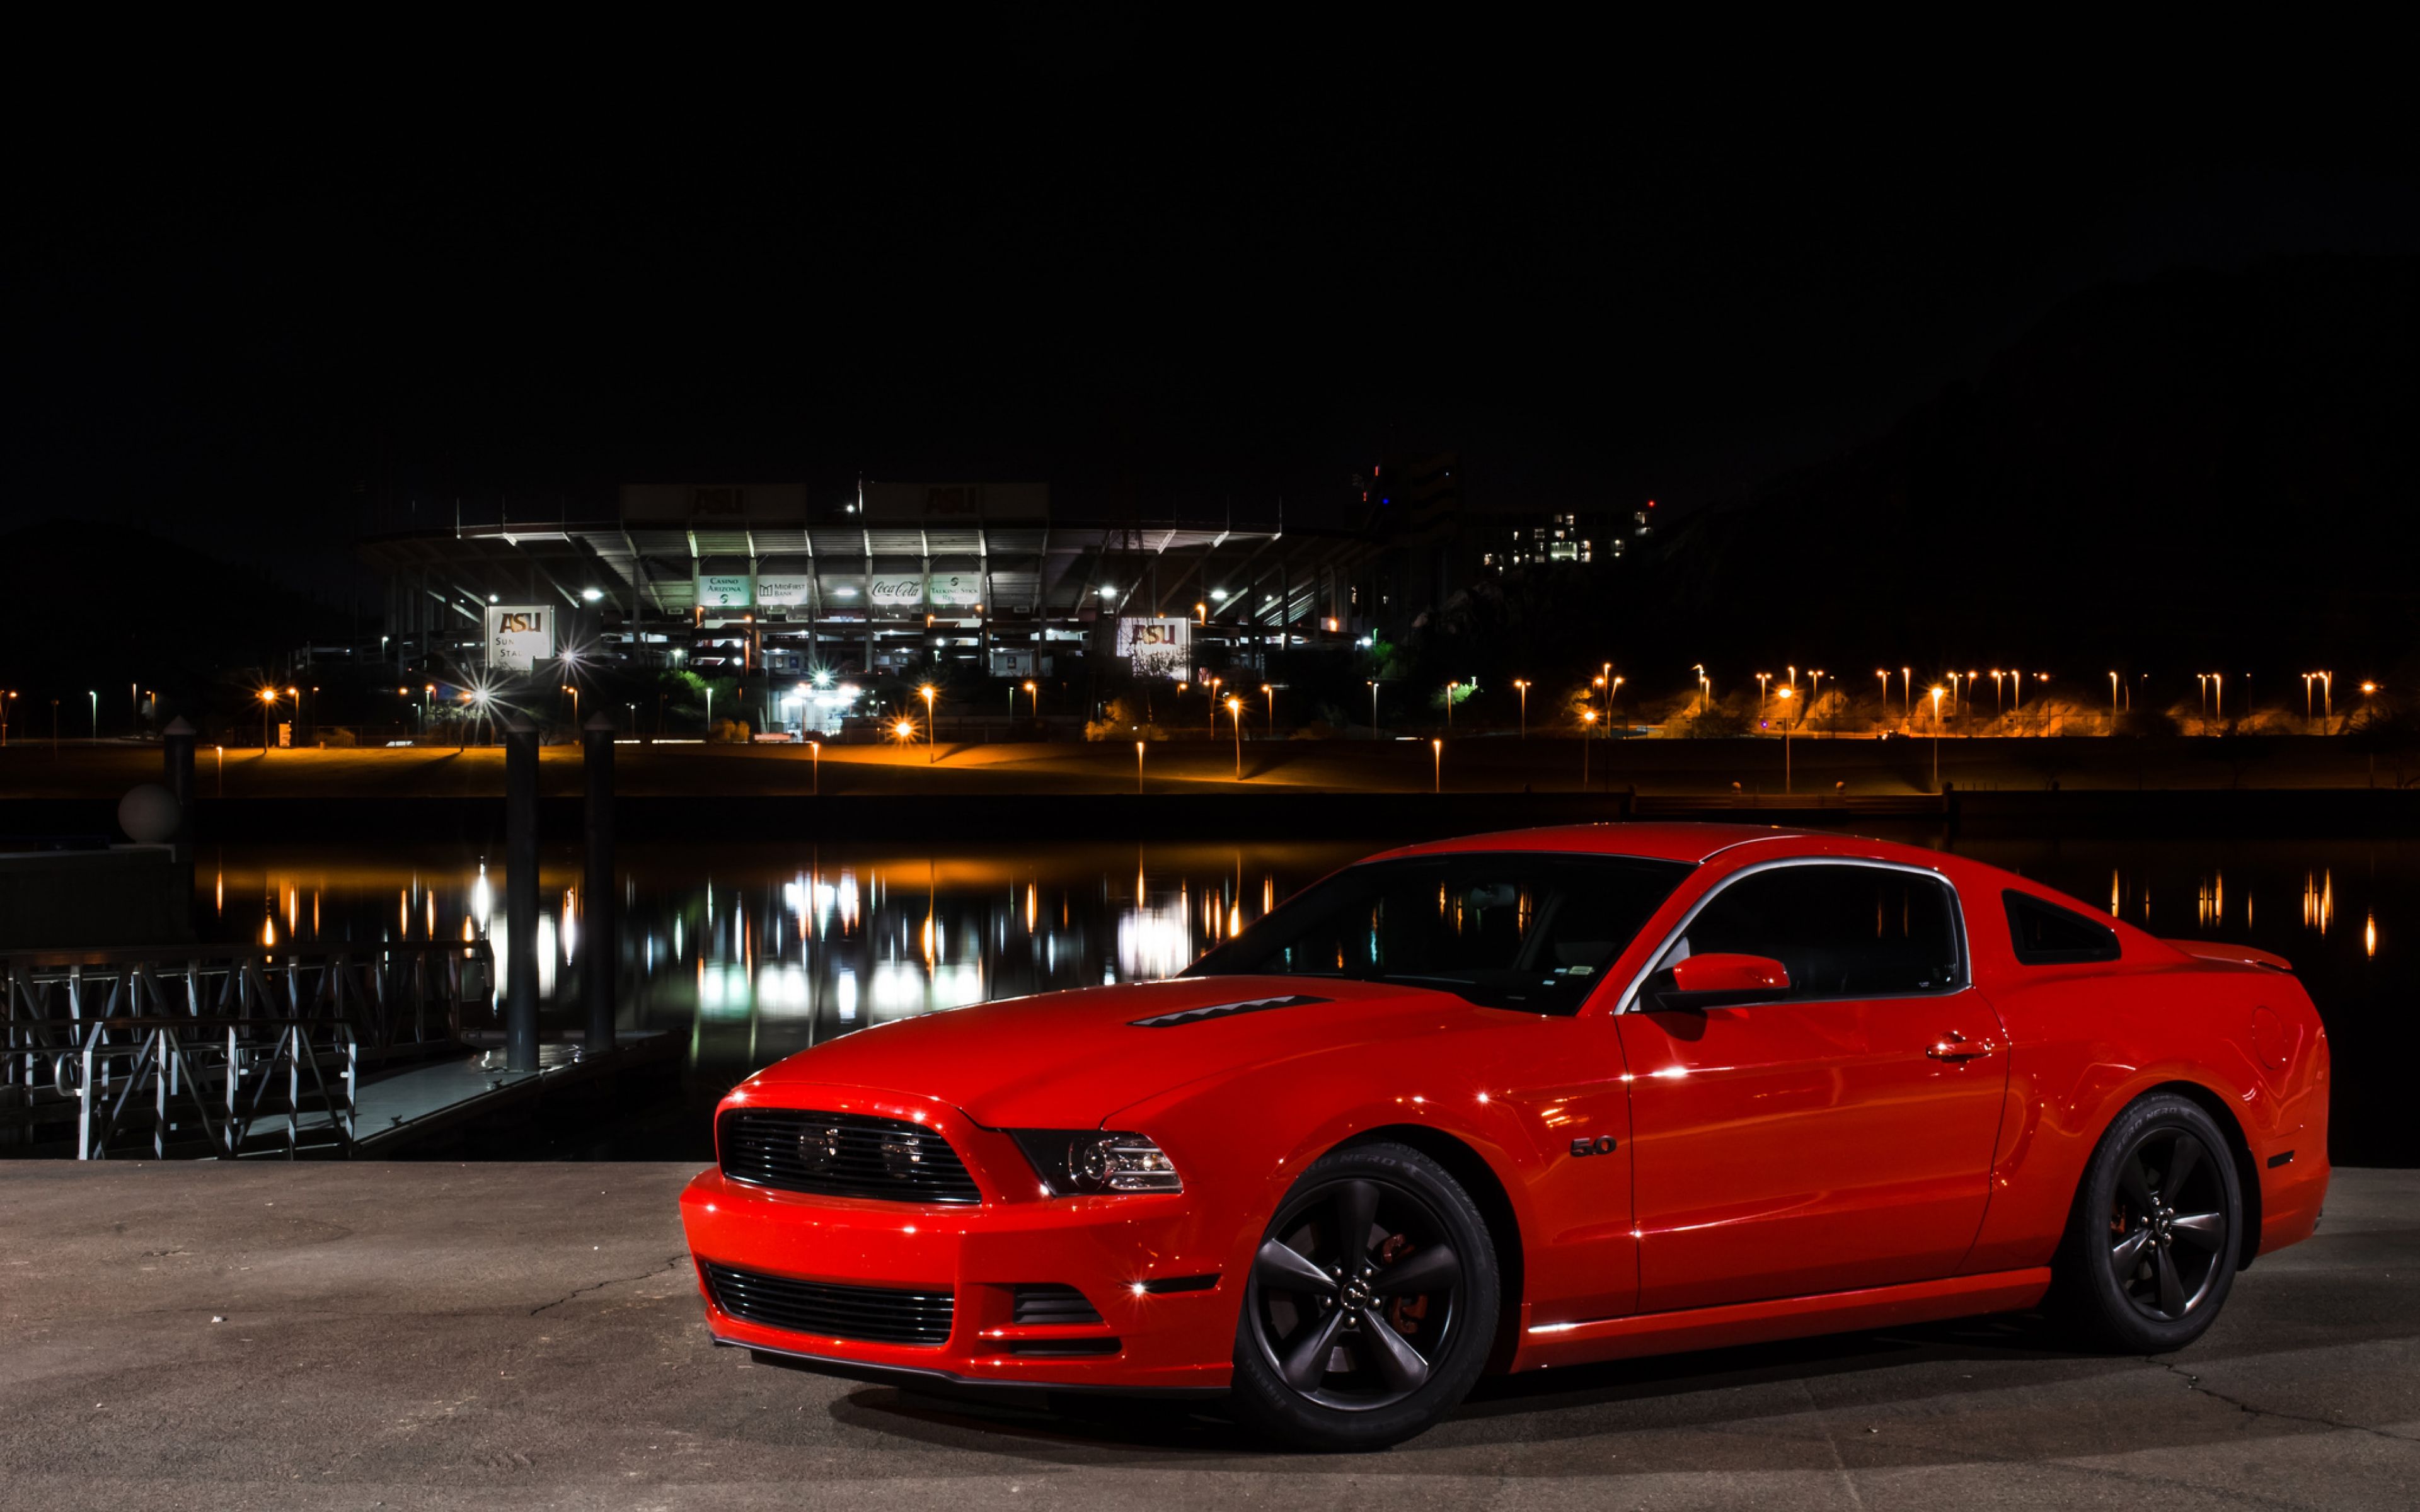 Free download Ford Mustang Gt Side view Red Wallpaper Background Ultra HD 4K [3840x2400] for your Desktop, Mobile & Tablet. Explore Mustang 4K Wallpaper. P 51 Mustang Wallpaper, Ford